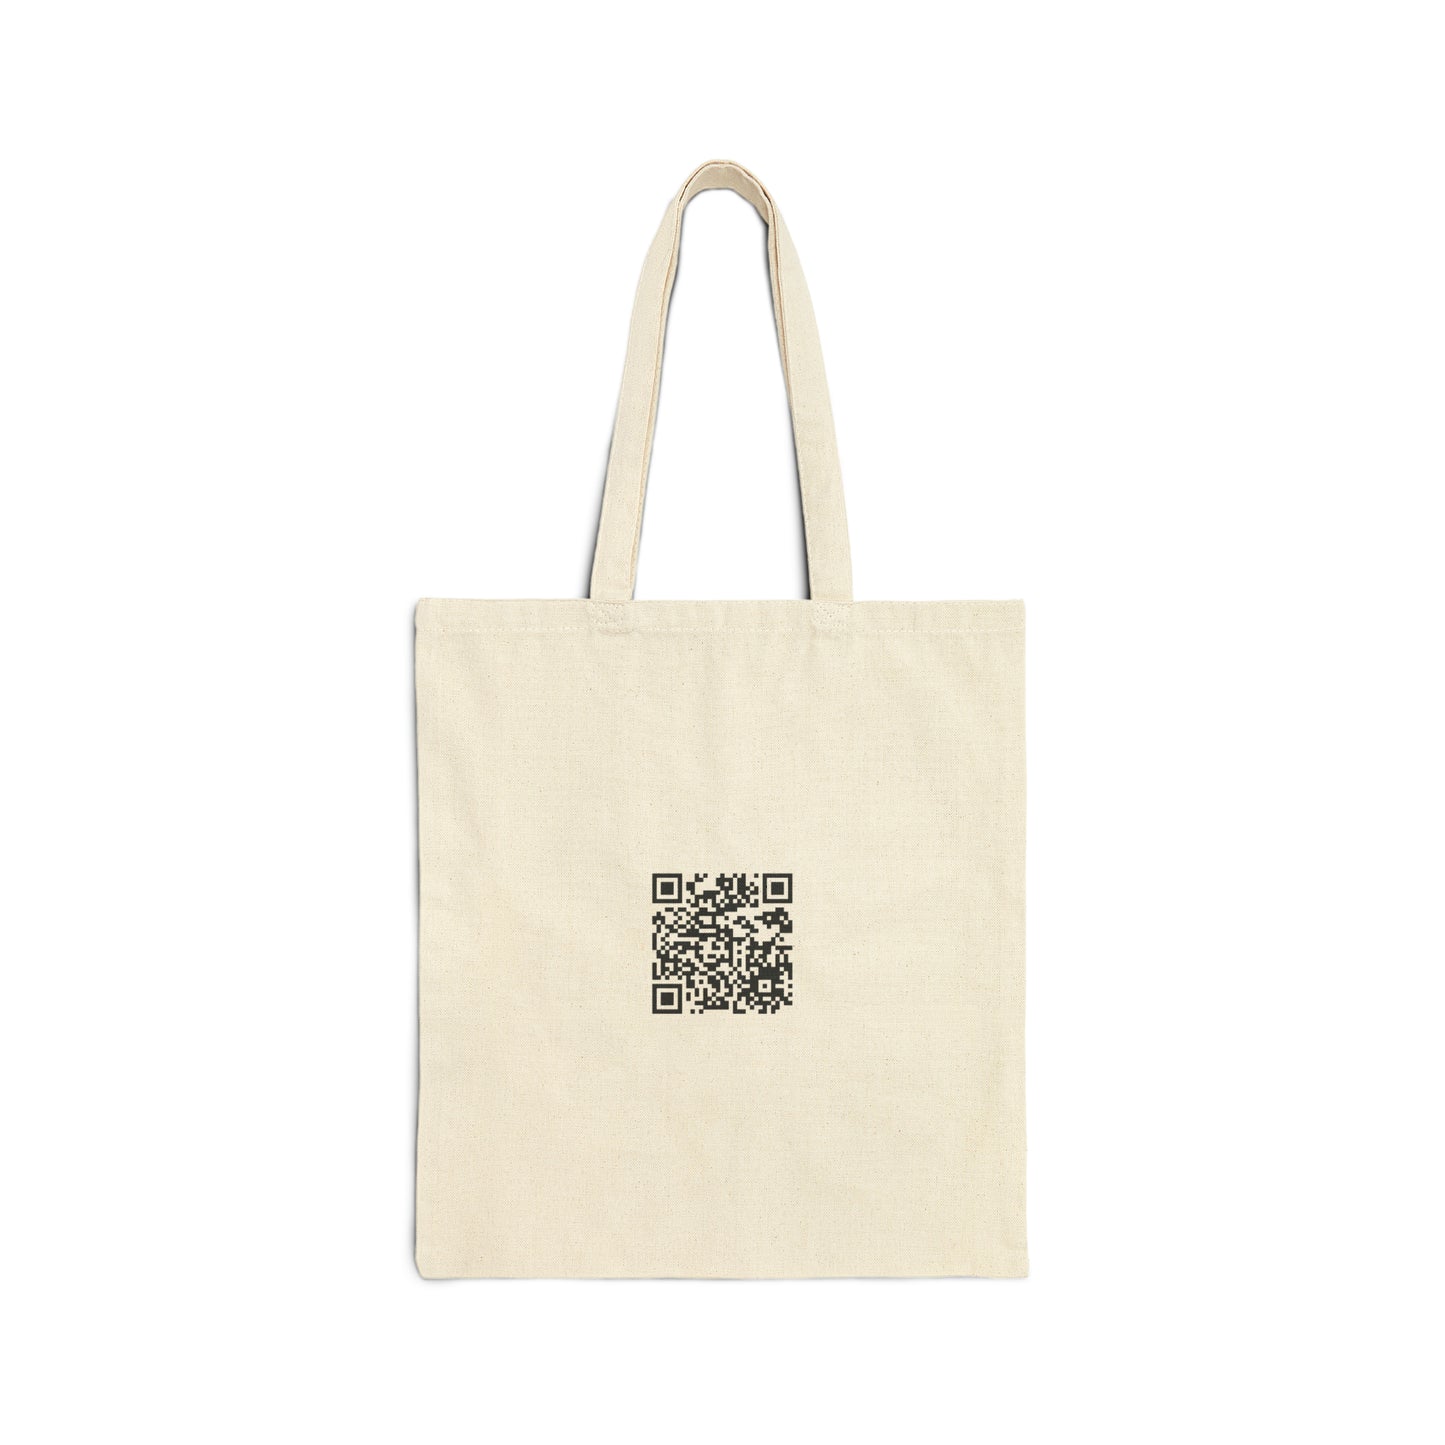 Hiding Cracked Glass - Cotton Canvas Tote Bag